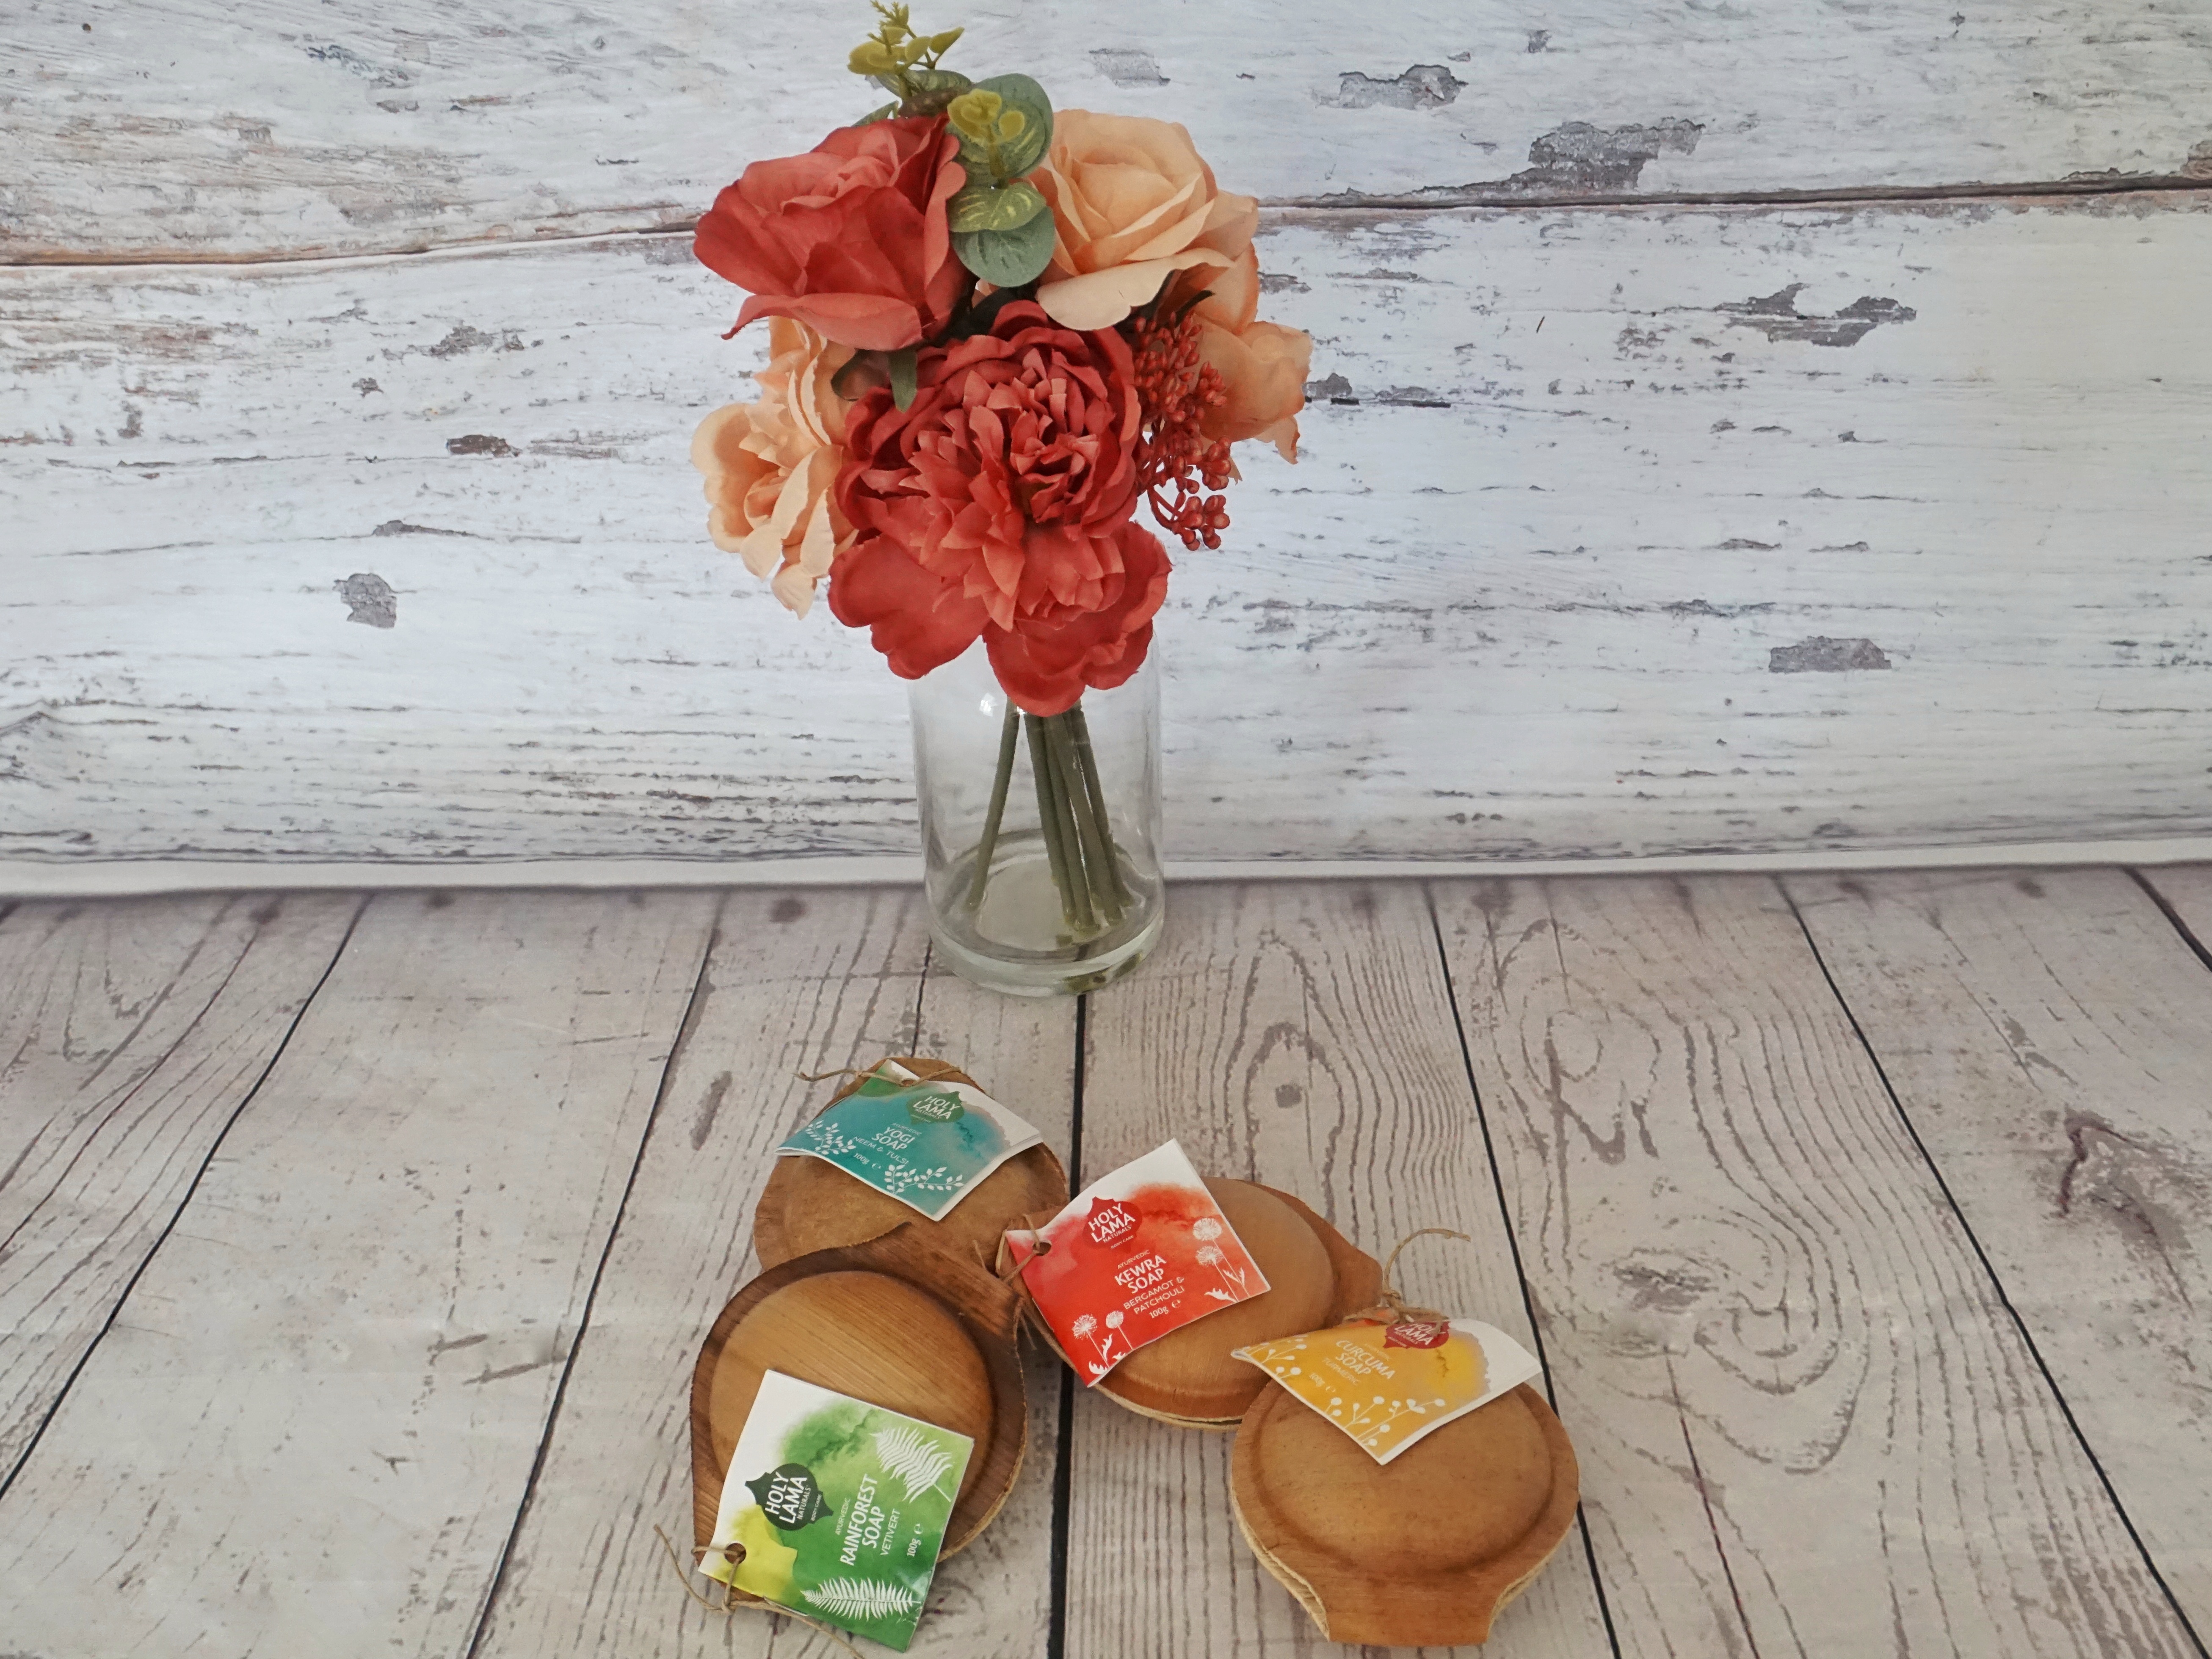 Four Holy Lama Soaps presented against a wooden background with red and peach flowers in a vase behind